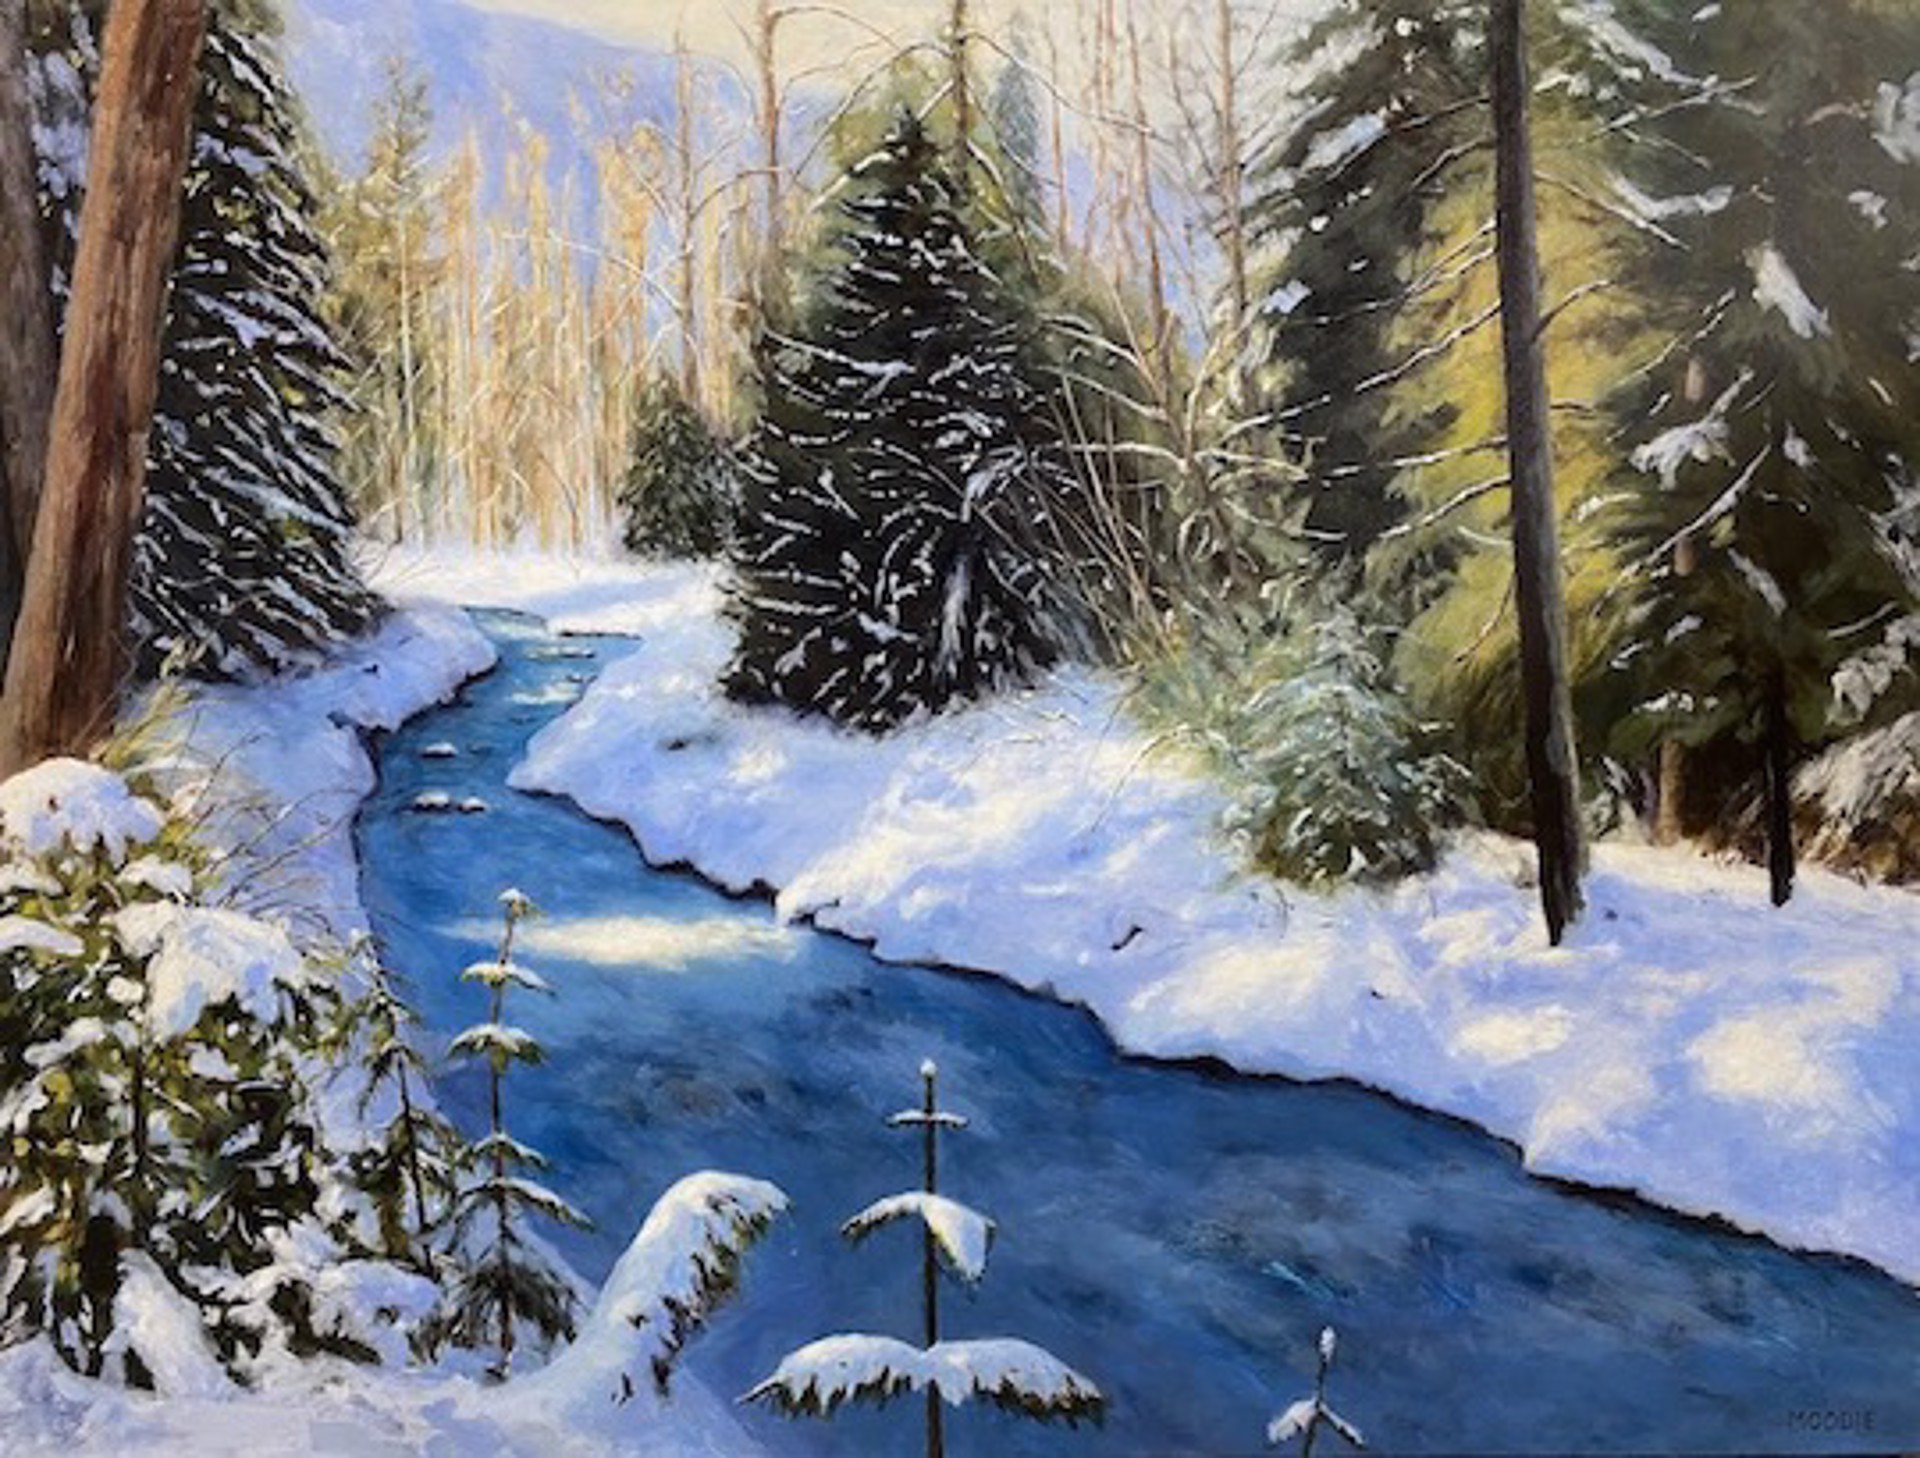 Fitzsimmons Creek by Doria Moodie